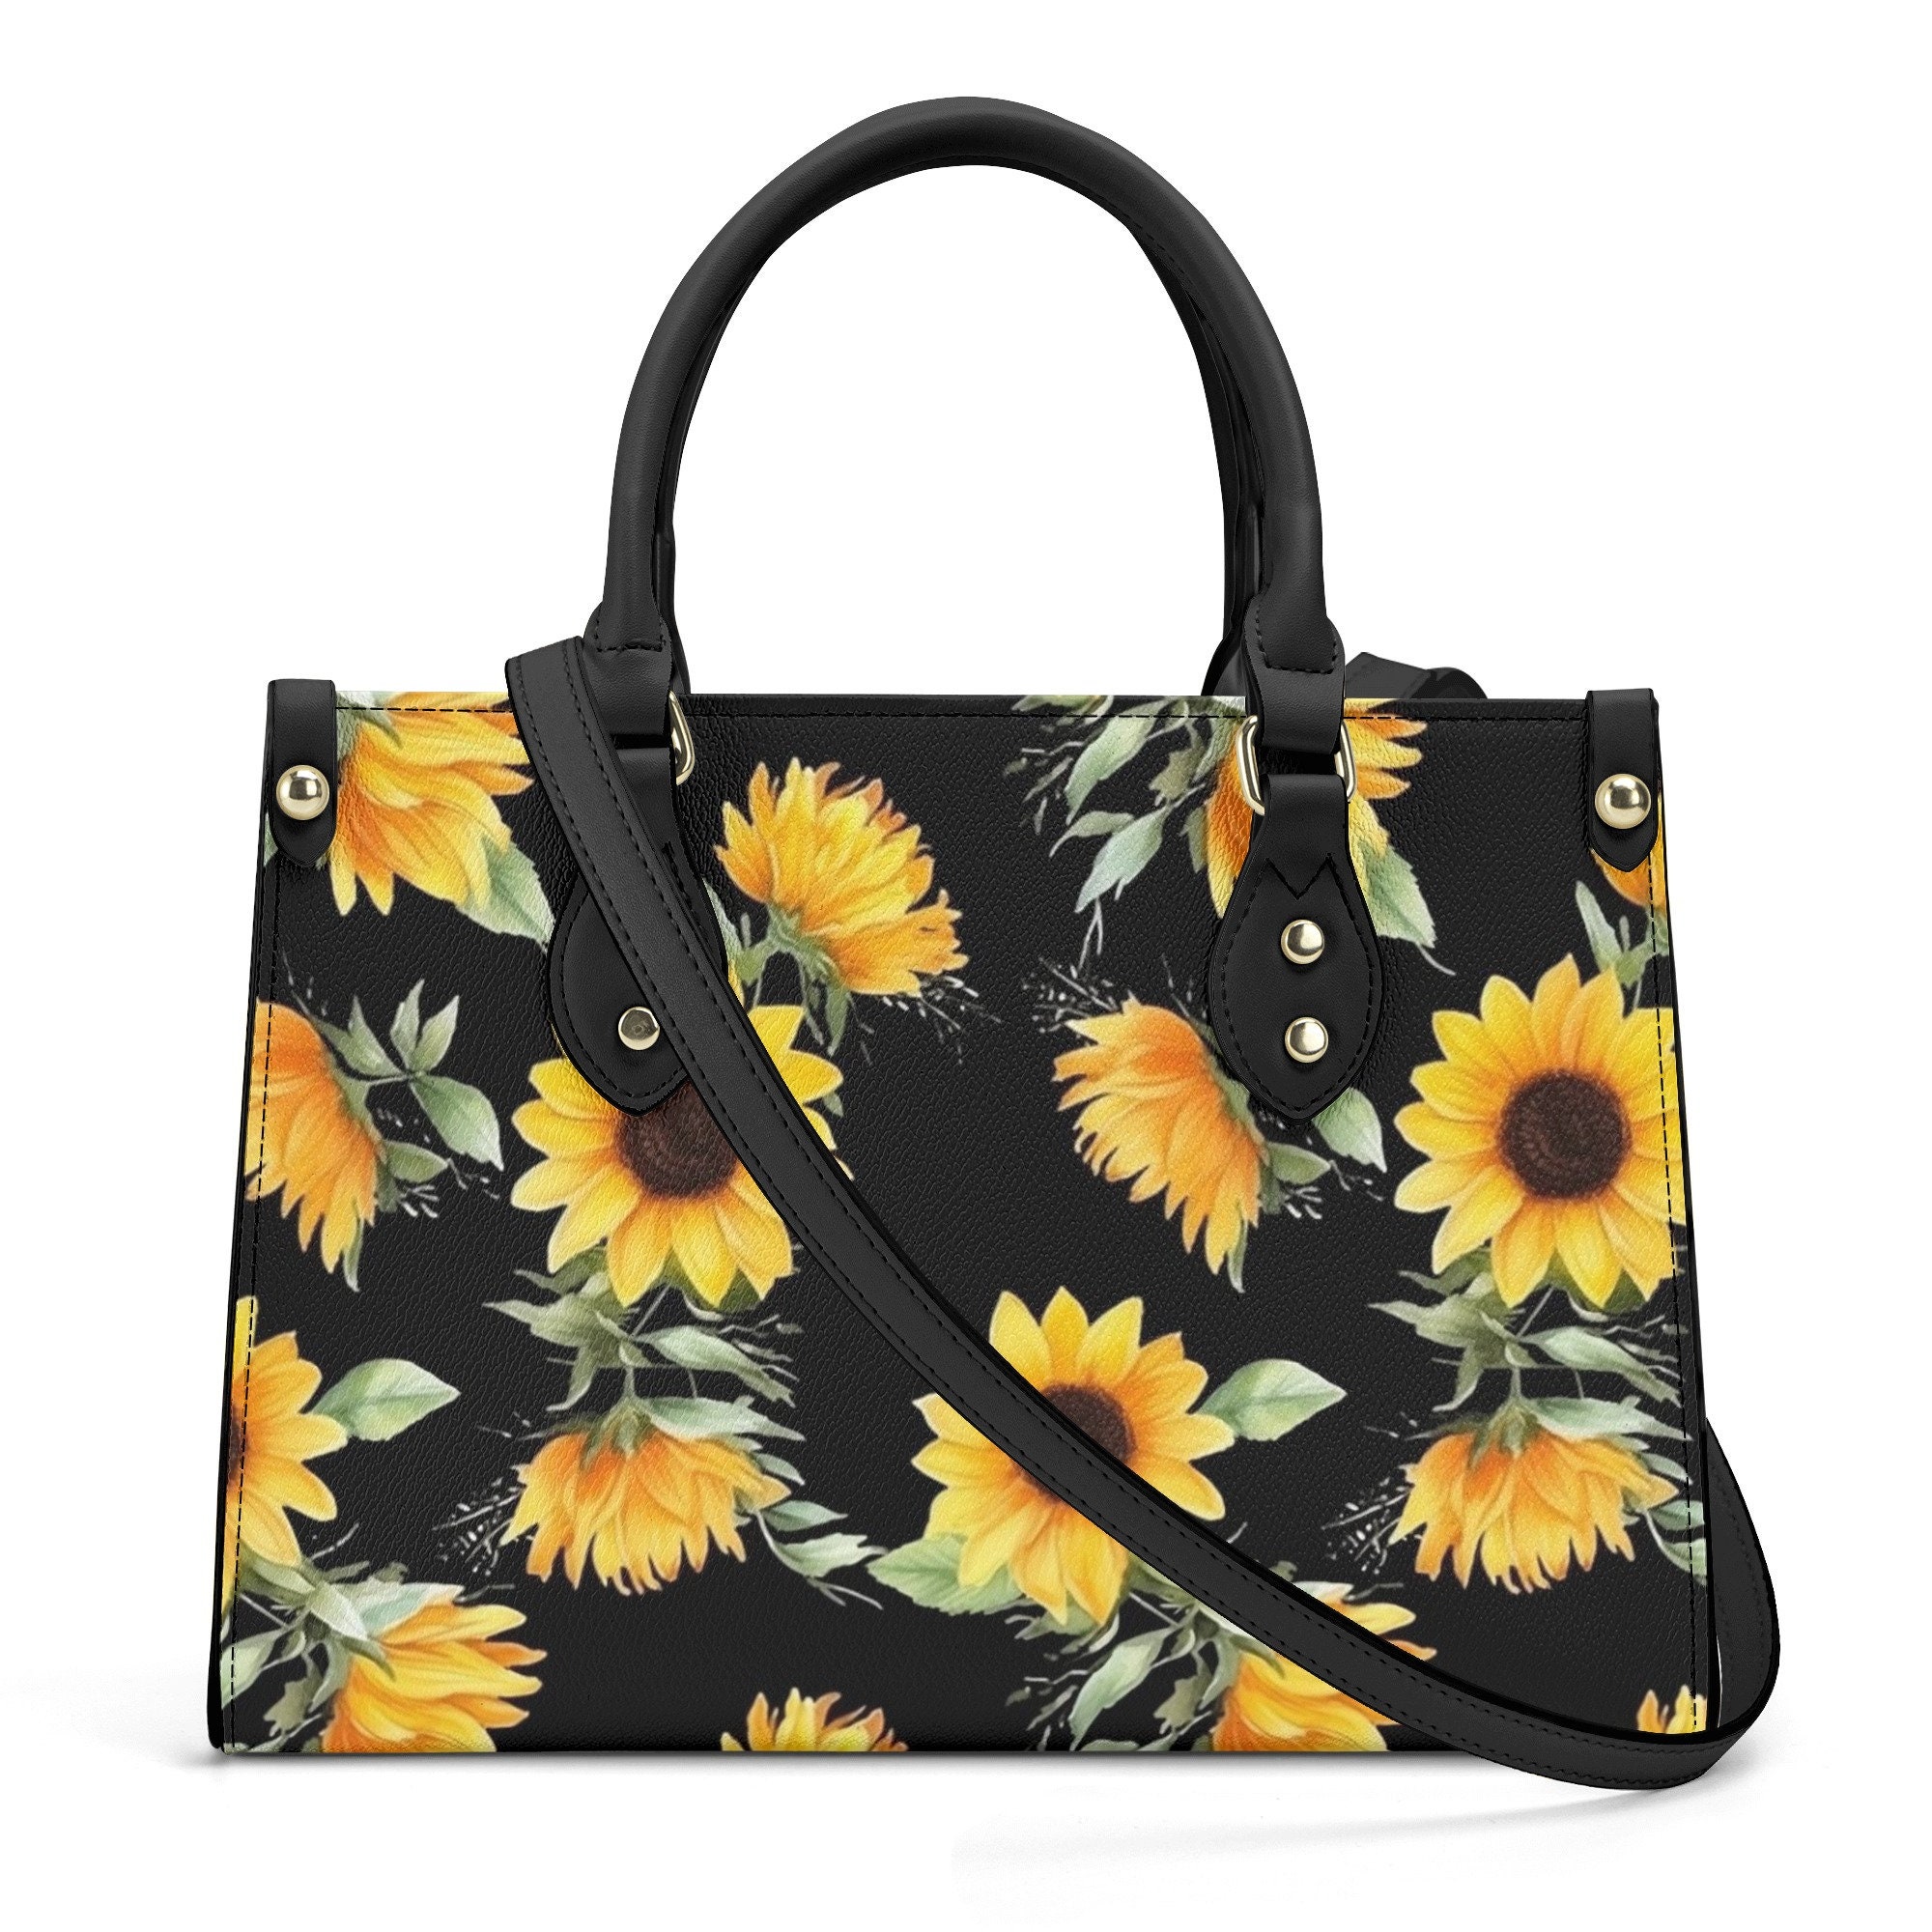 Small Tote Bag for Women Square Shape Handbag Double Top Handles Purse with  Sunflower Print and Removable Shoulder Strap